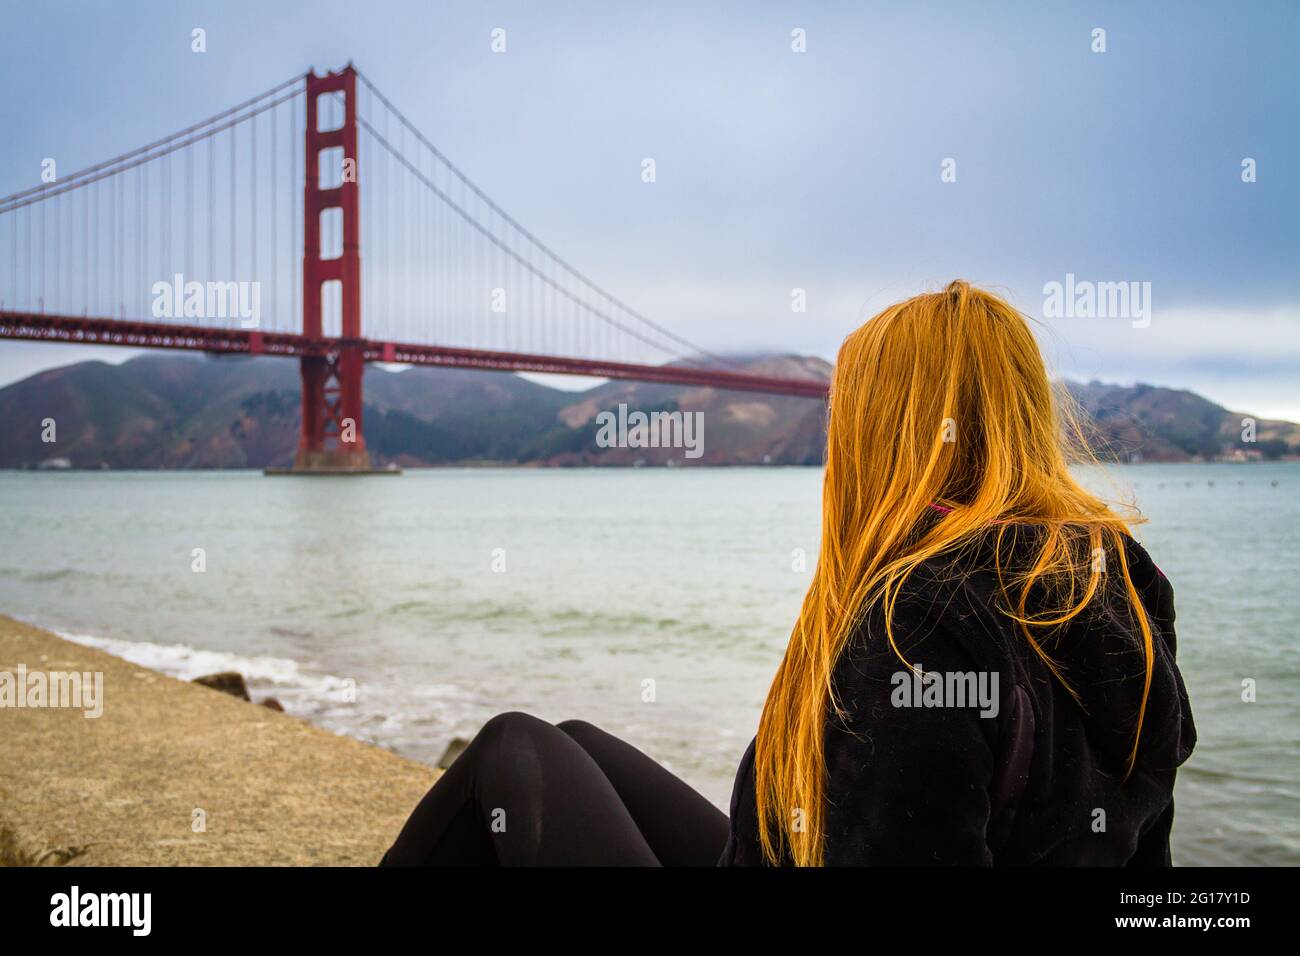 A young woman with red long hair sitting by San Francisco Bay watching the Golden Gate Bridge Stock Photo